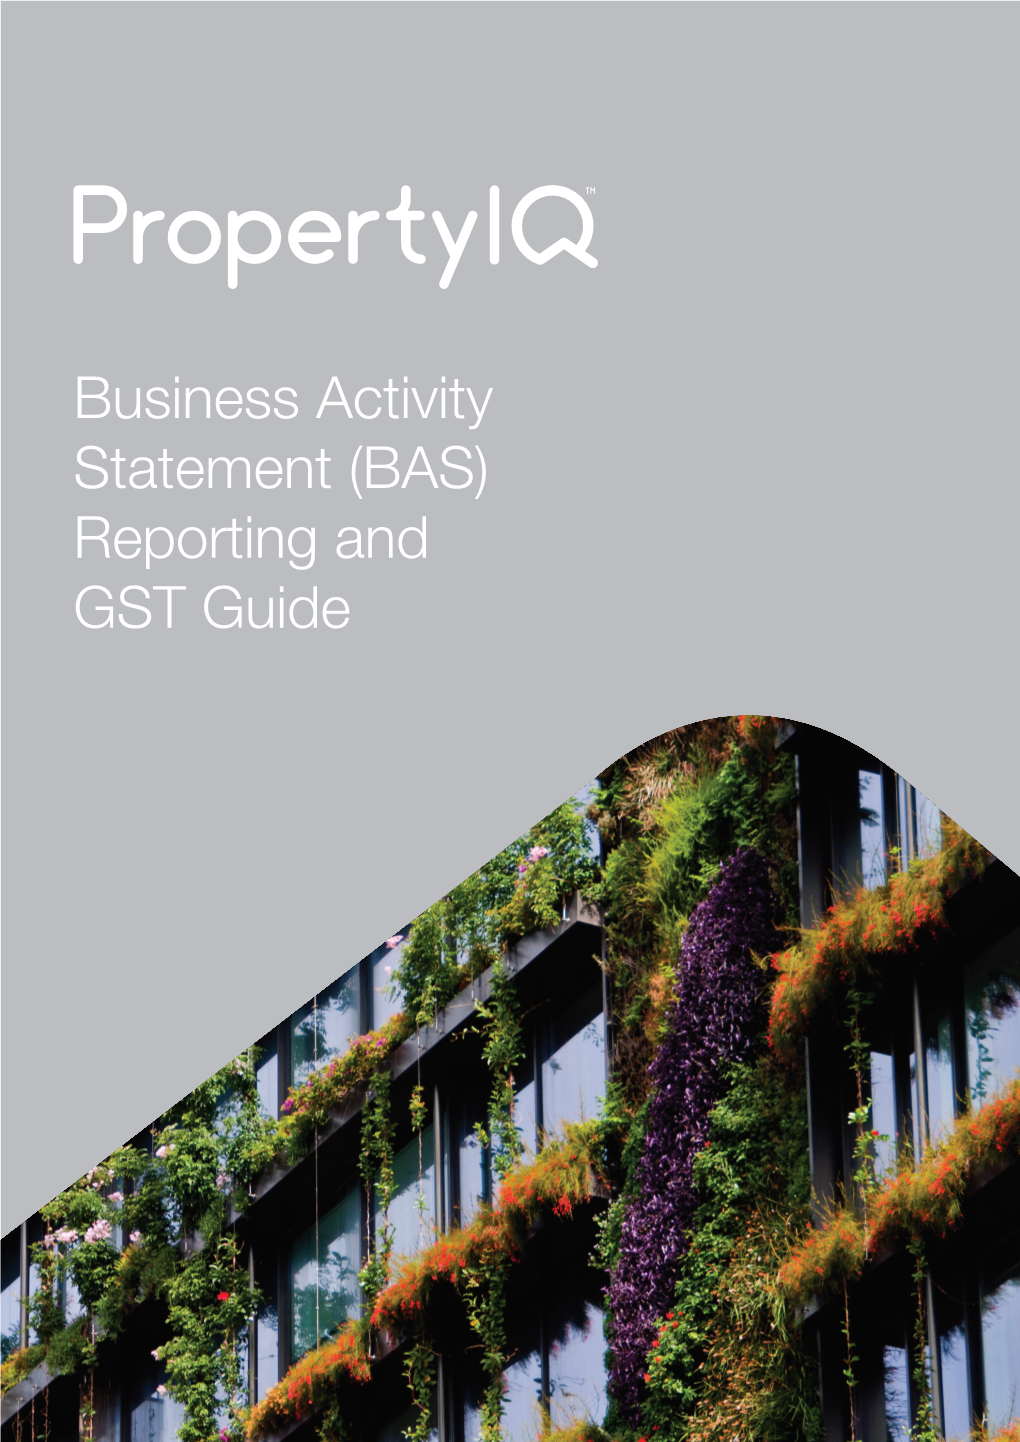 Business Activity Statement (BAS) Reporting and GST Guide